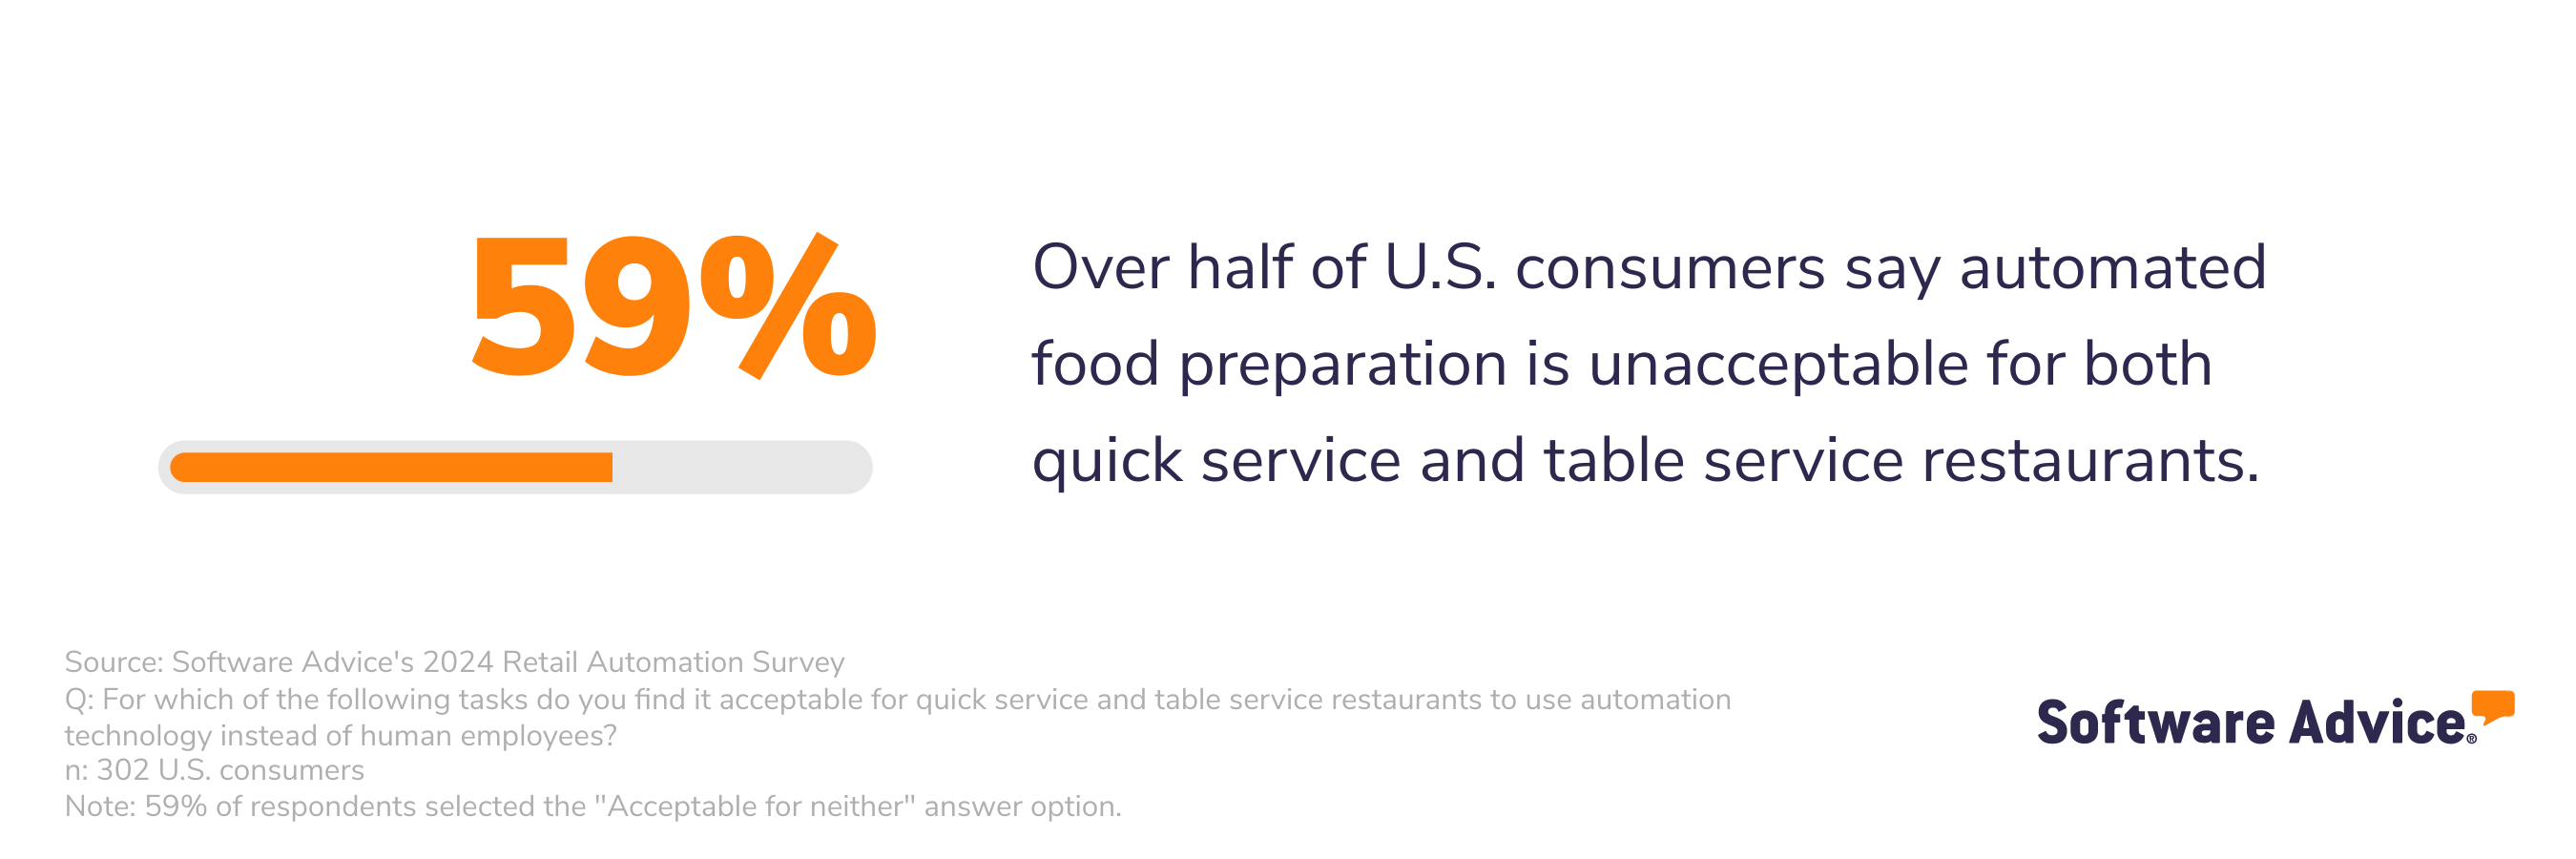 Over half of U.S. consumers say automated food preparation is unacceptable for both quick service and table service restaurants.